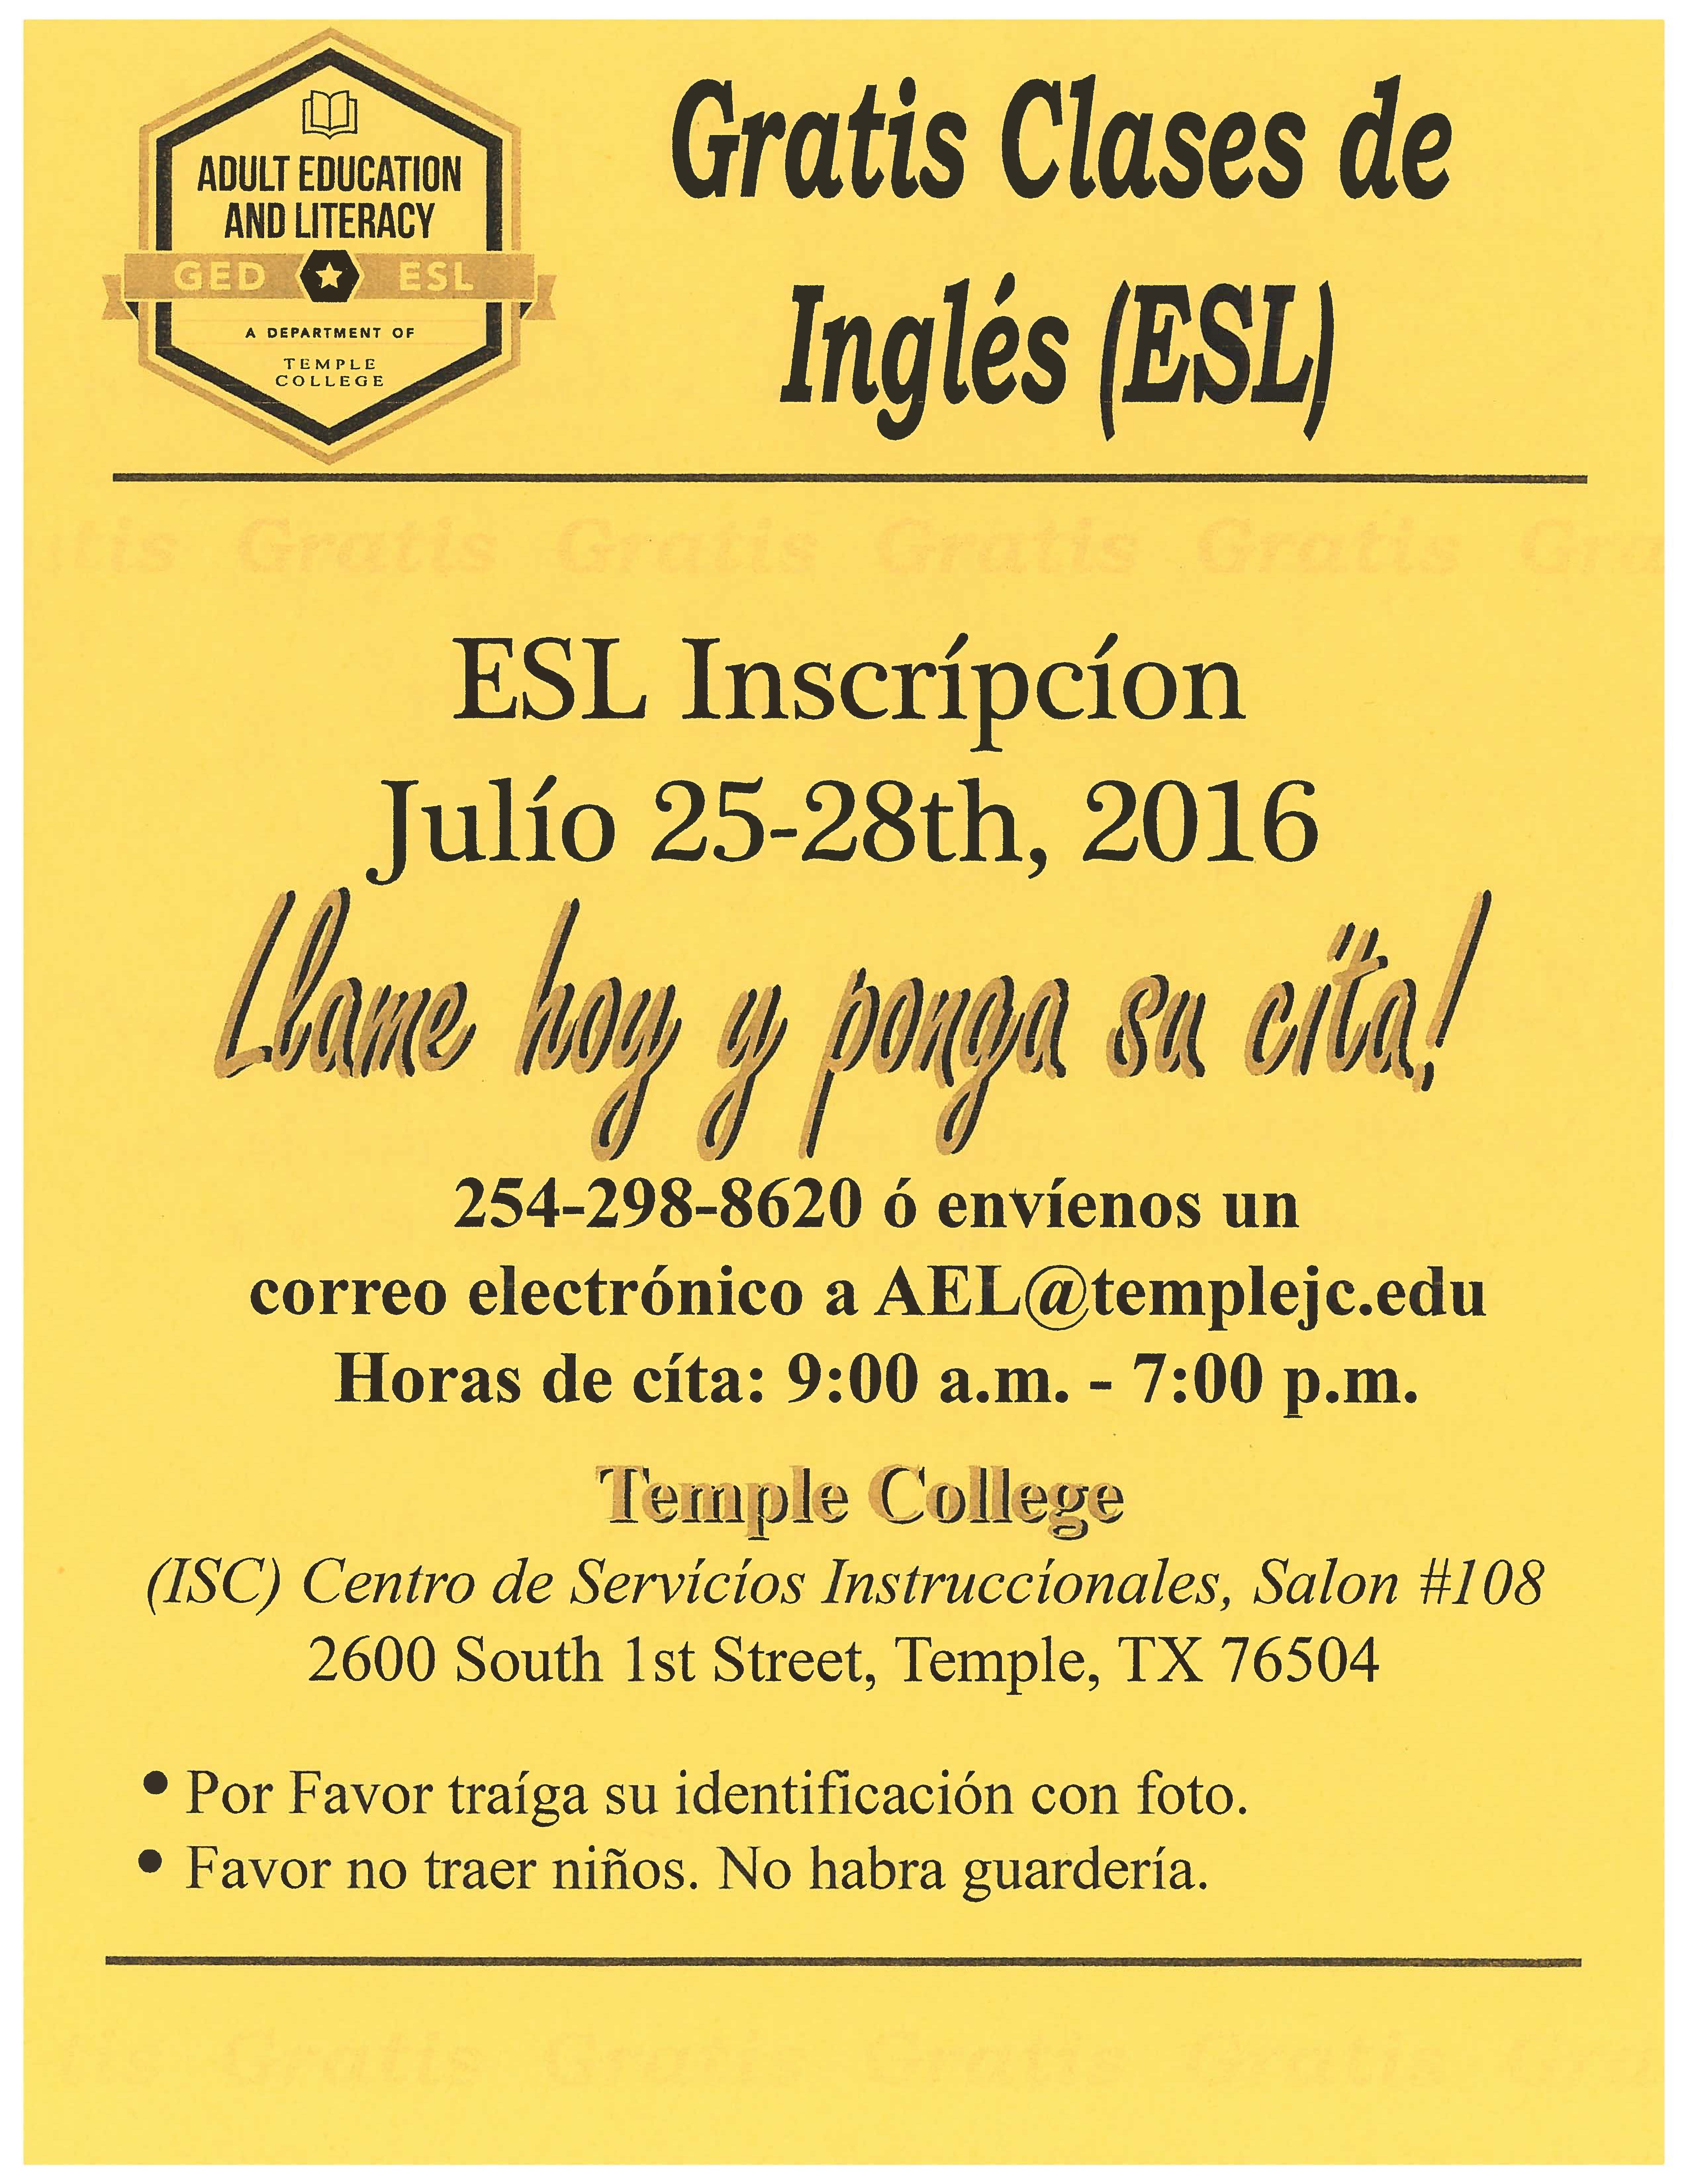 english-as-a-second-language-classes-esl-central-texas-council-of-governments